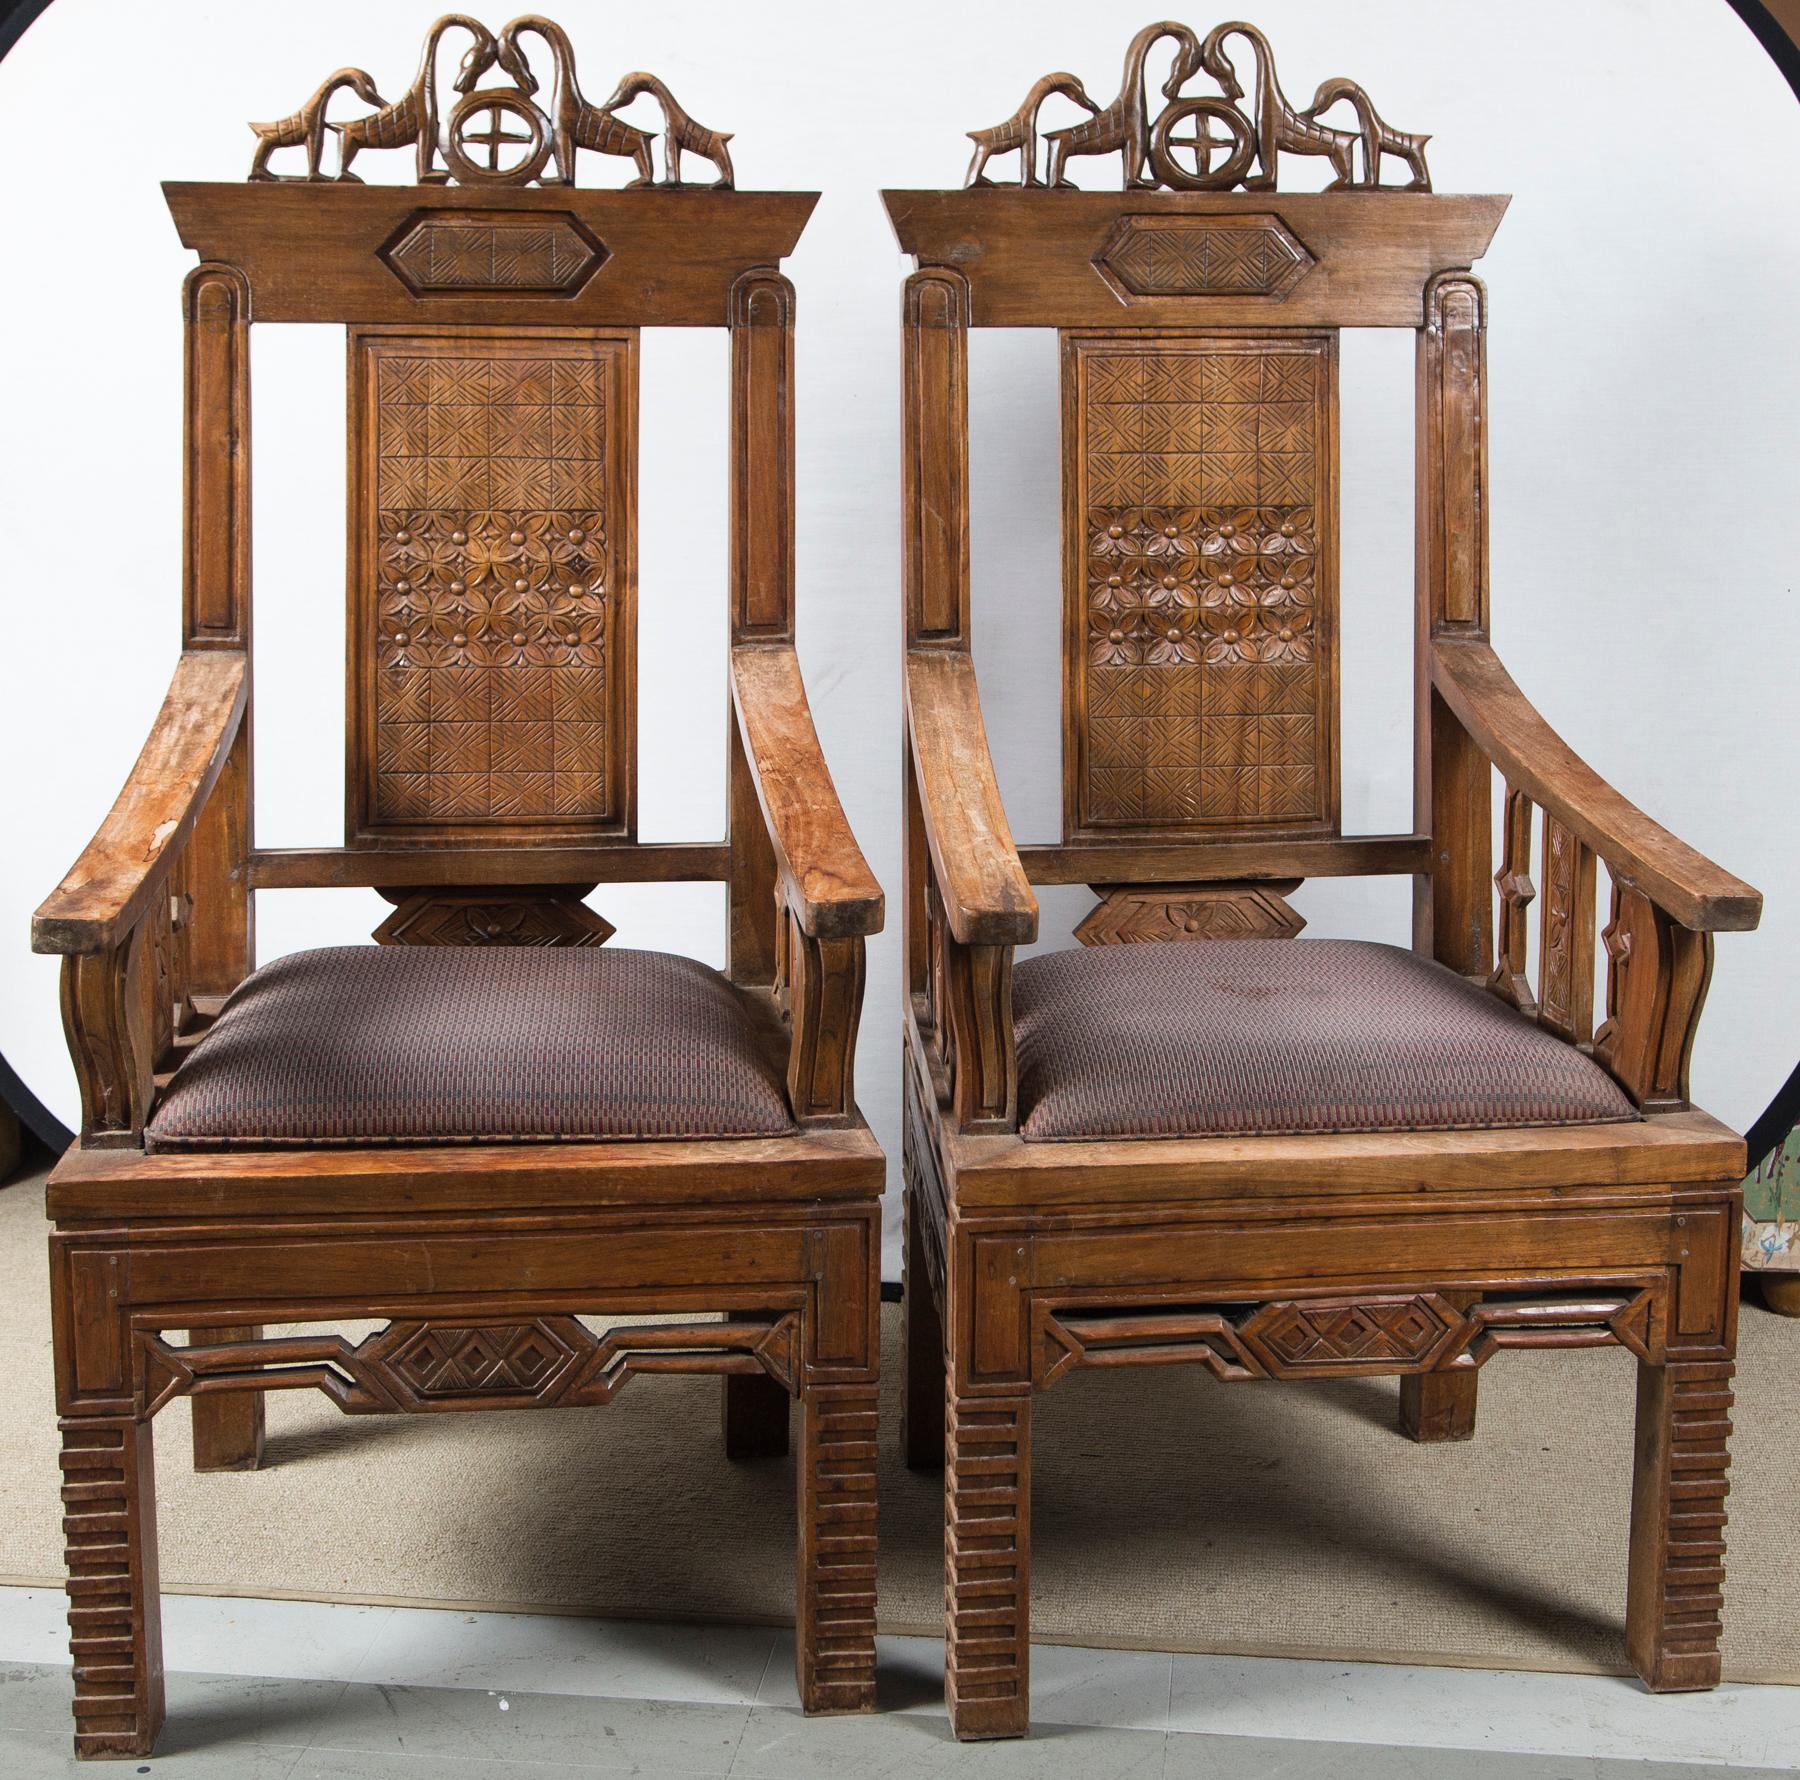 Pair of 19th century Scottish Orkney Island chairs.